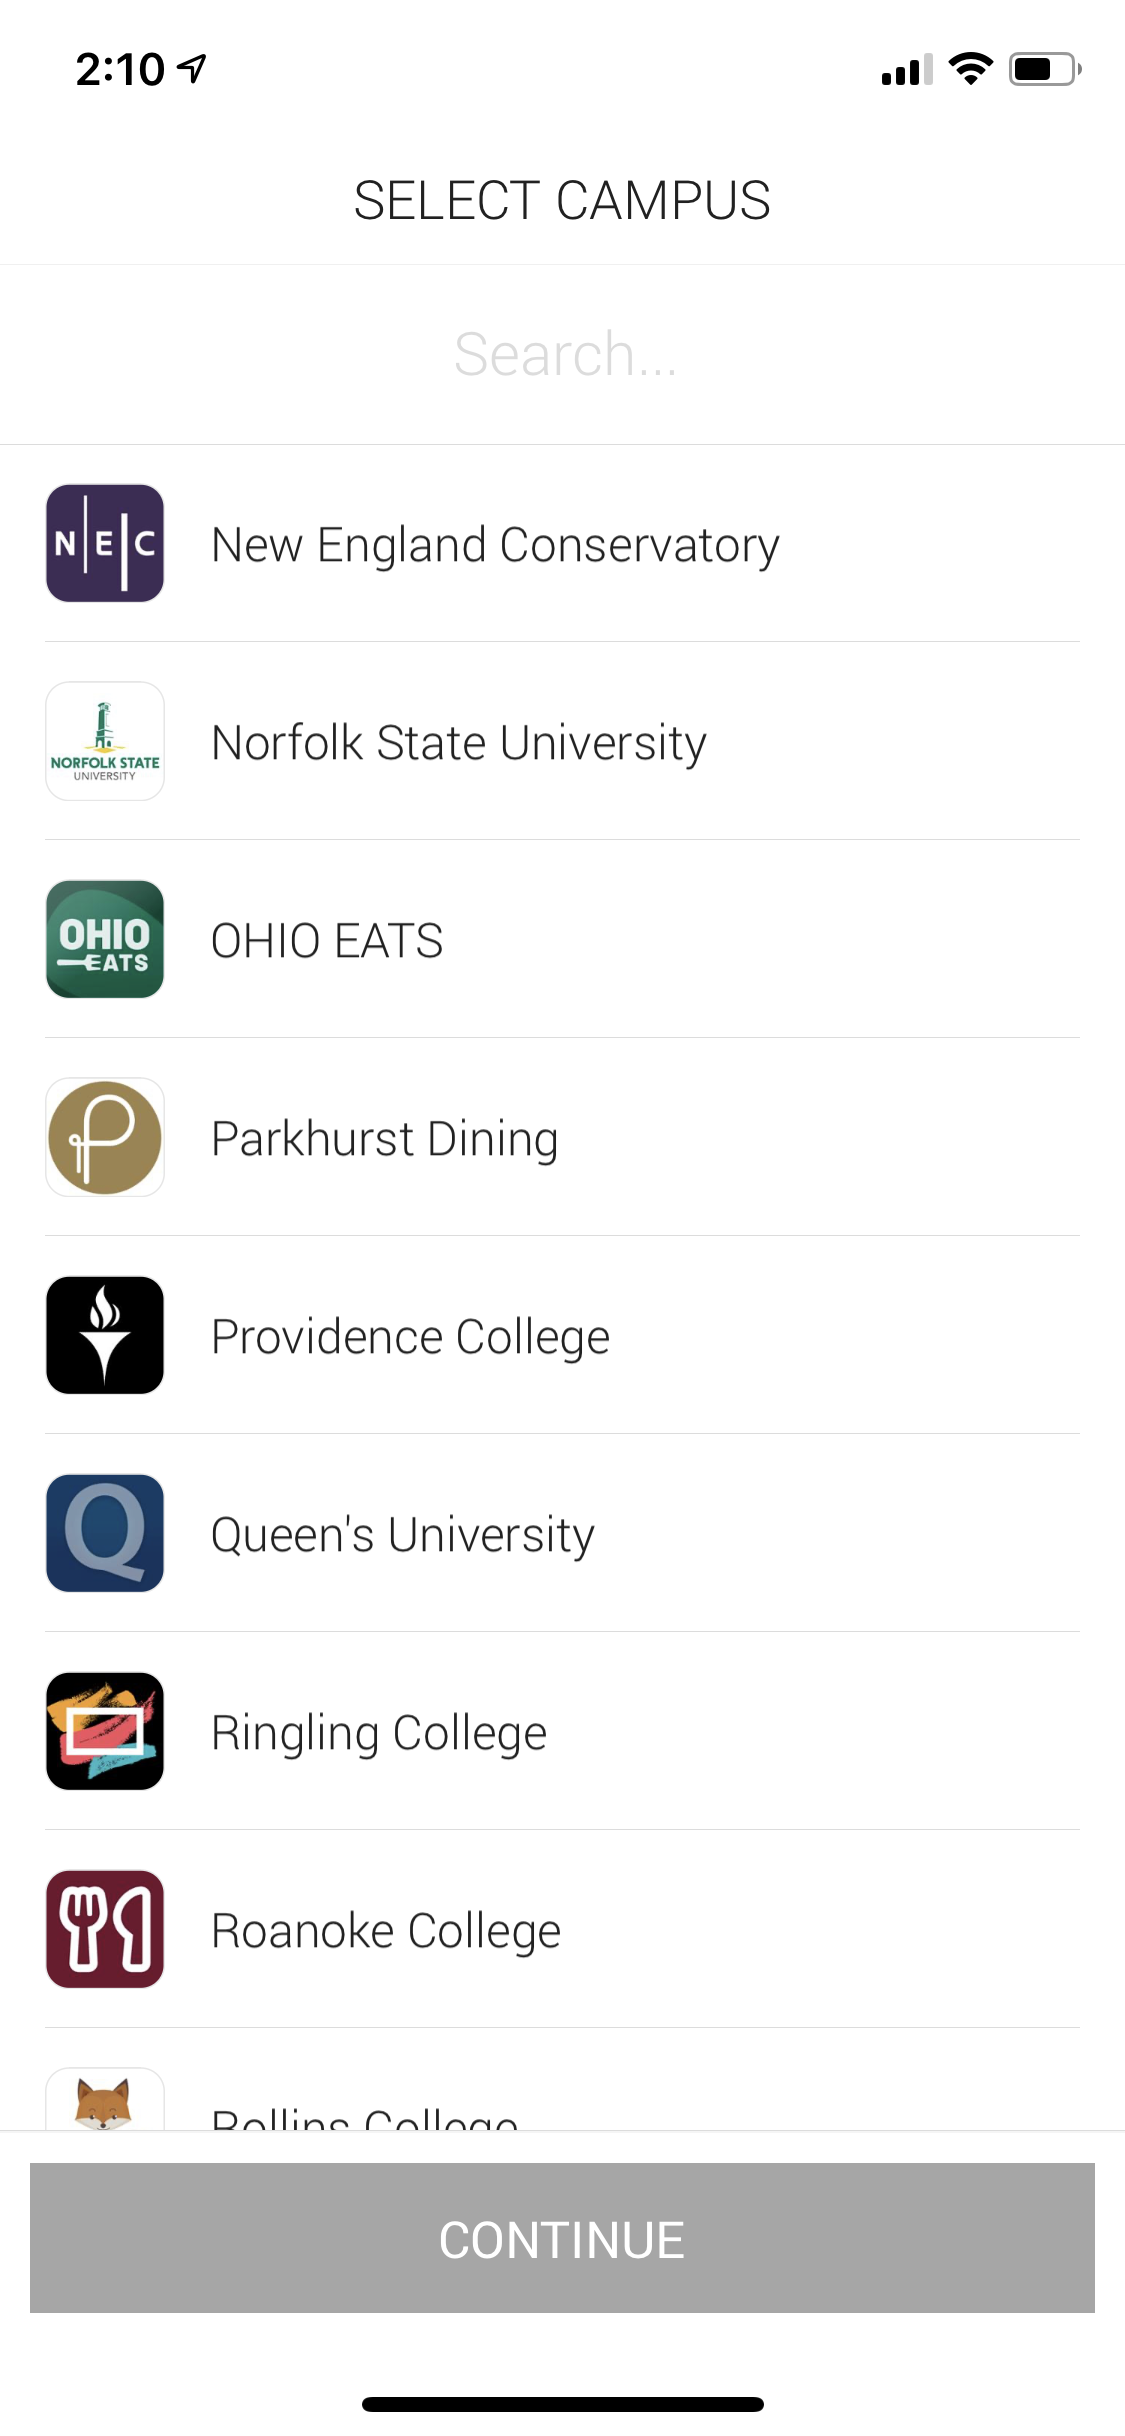 OHIO EATS app screen 1: choose OHIO EATS from the list of available locations